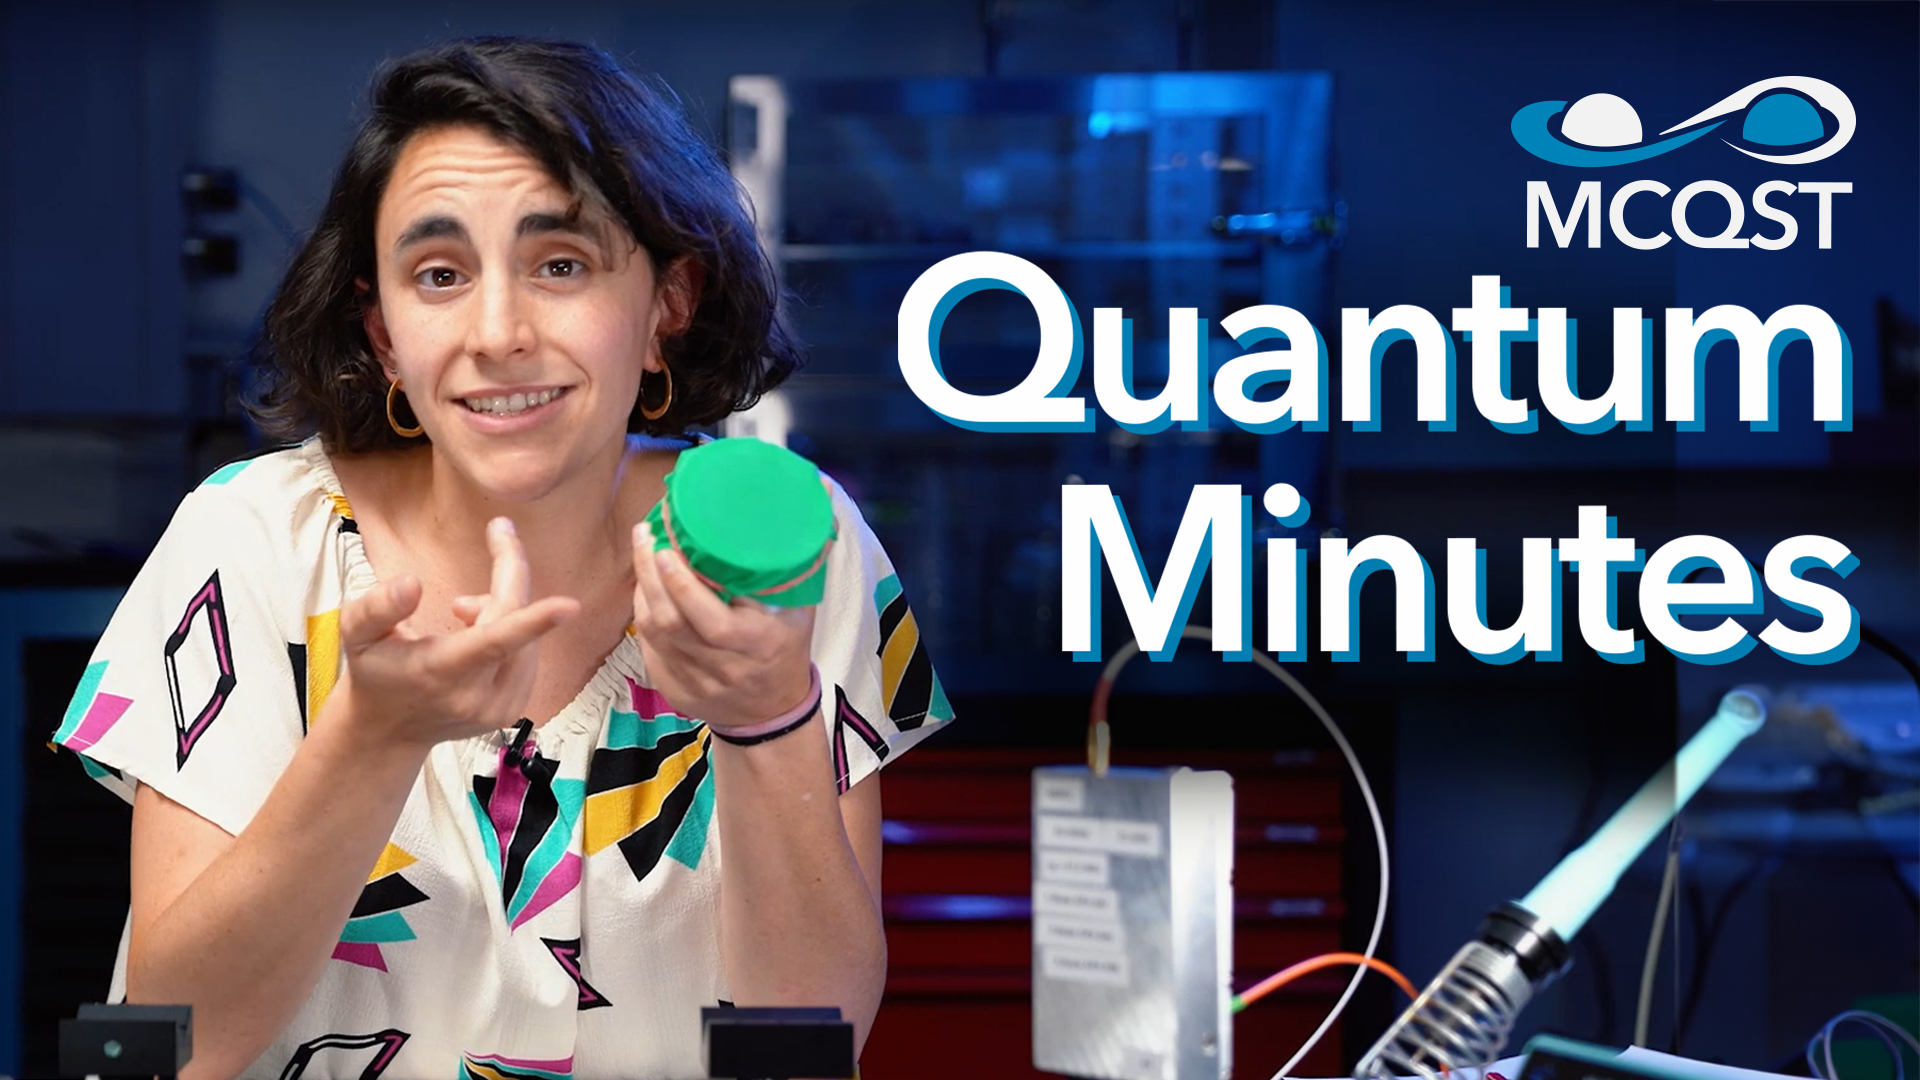 Teaser image for the video series "Quantum Minutes" of the Cluster of Excellence MCQST (pictured is Dr. Irene Sanchez Arribas from the TUM Chair of Nano and Quantum Sensor Technology)